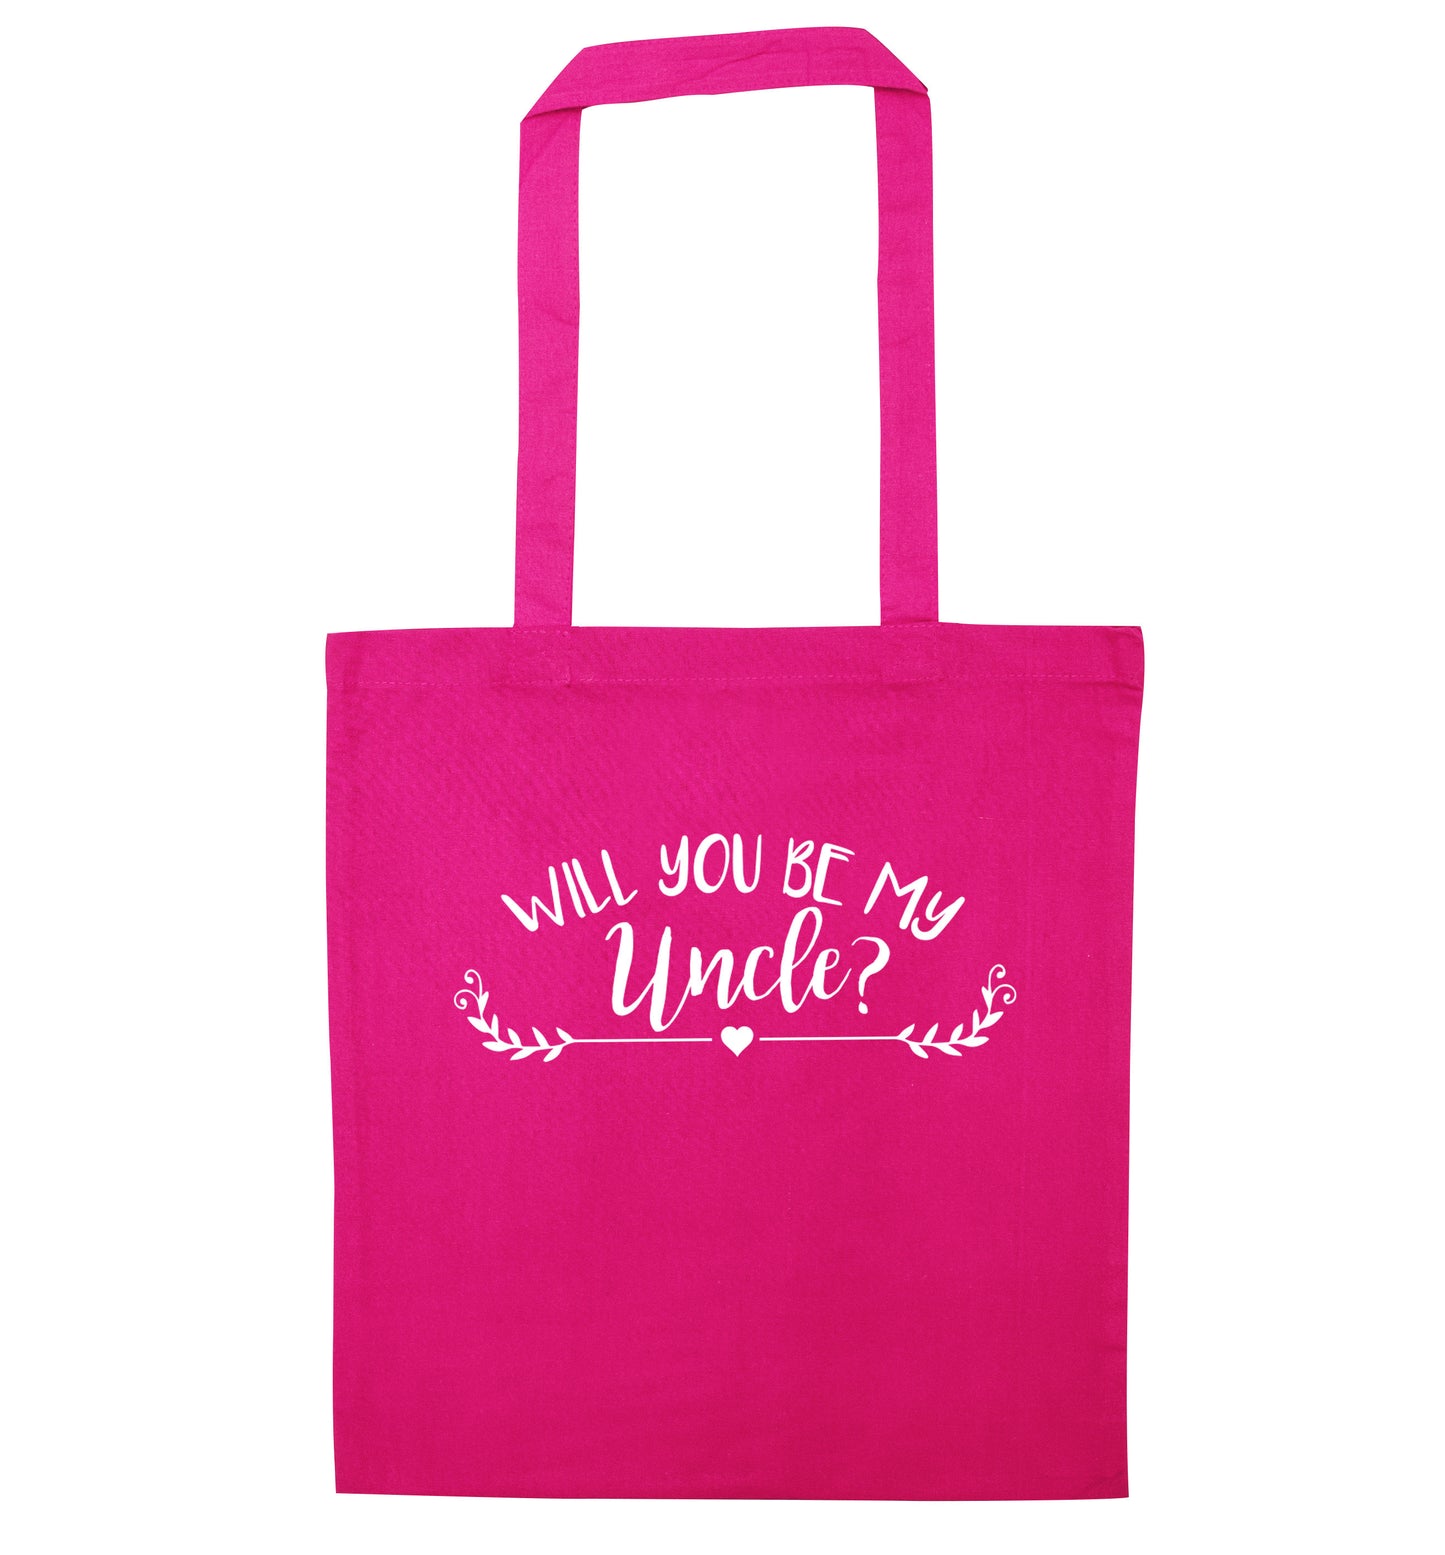 Will you be my uncle? pink tote bag